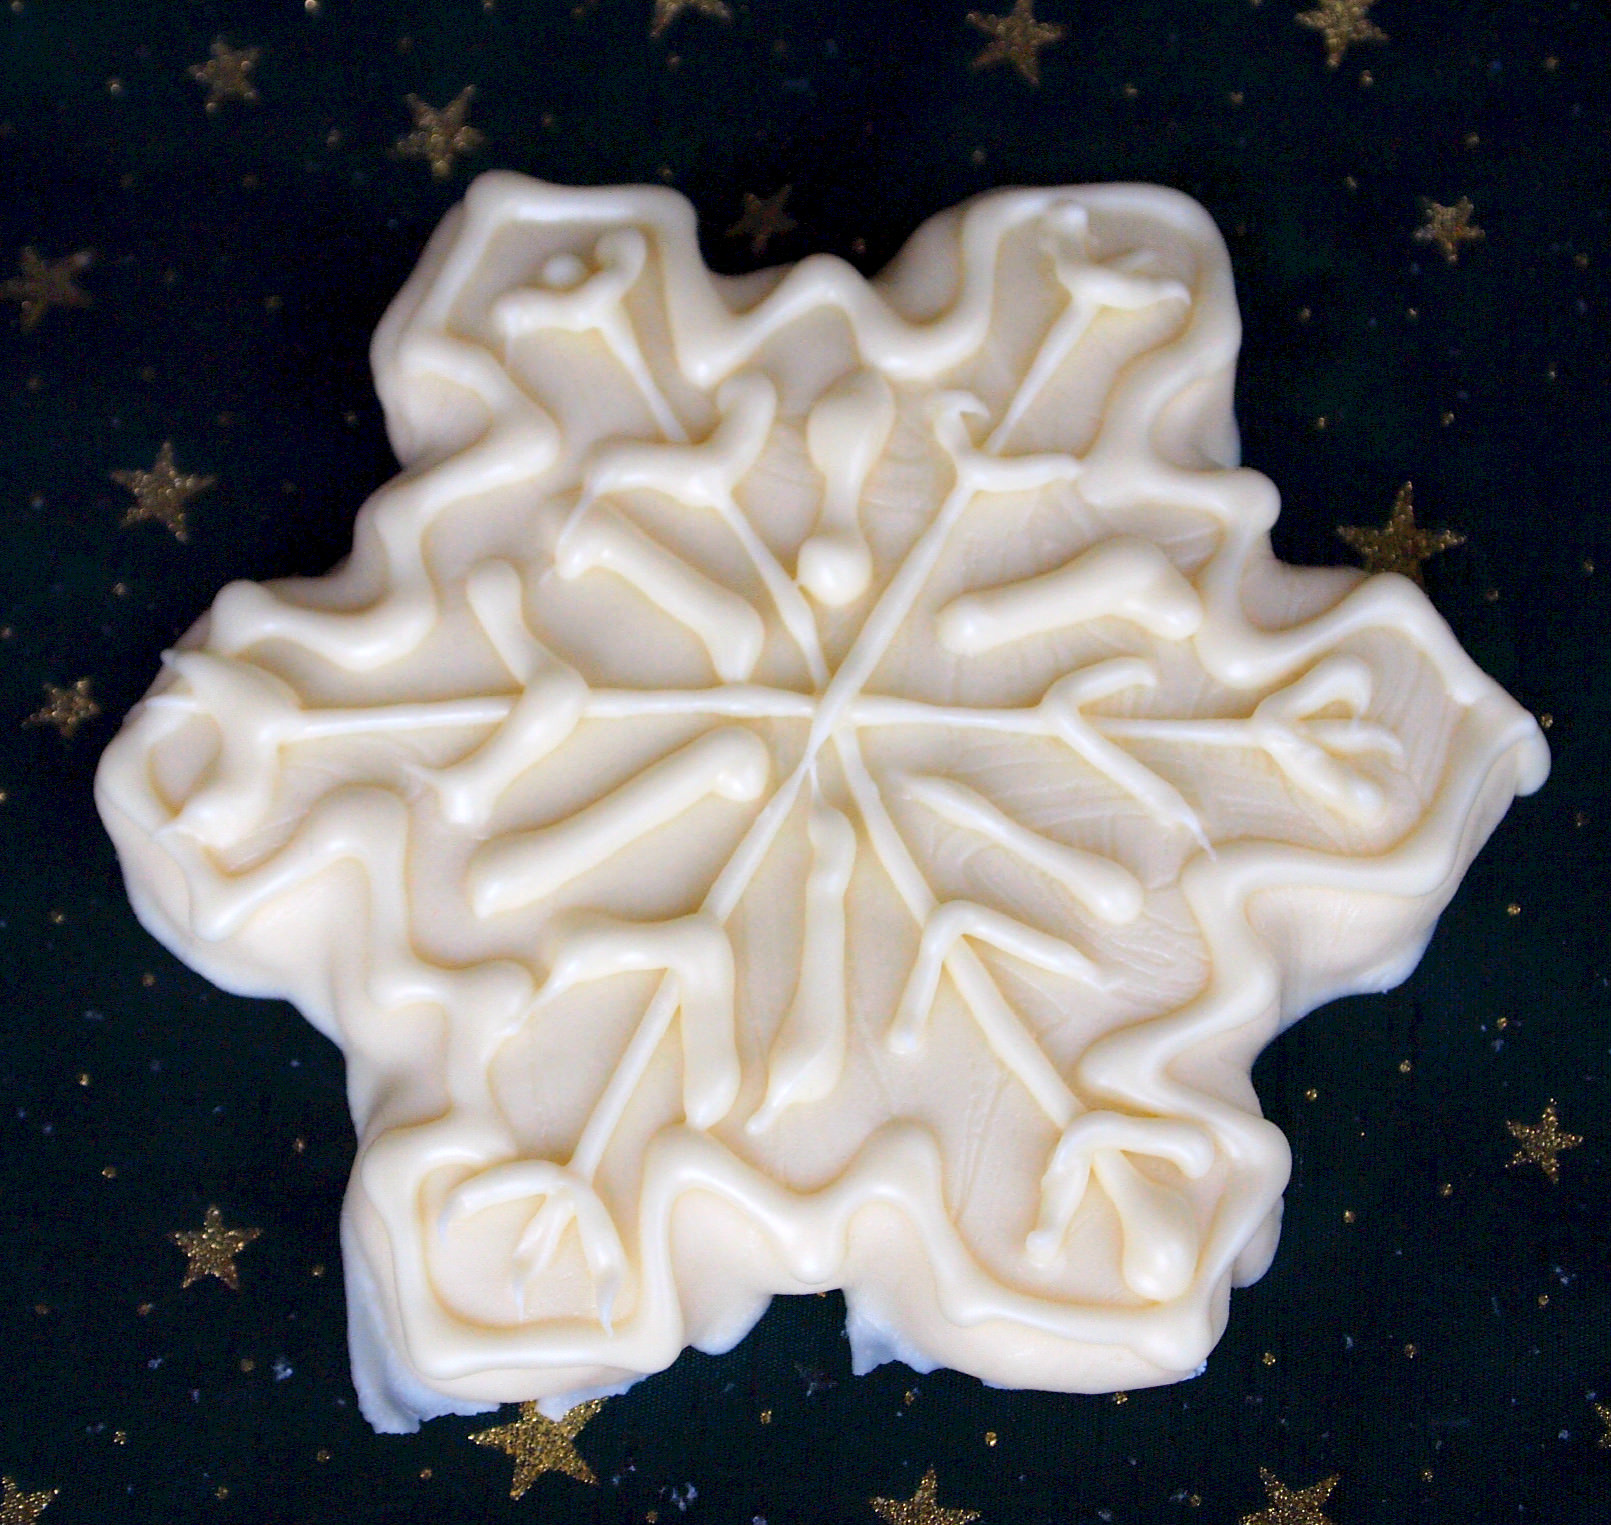 Decorated Shortbread Cookies will be the prettiest holiday cookies on your Christmas cookie platter! Get the recipe from ComfortablyDomestic.com